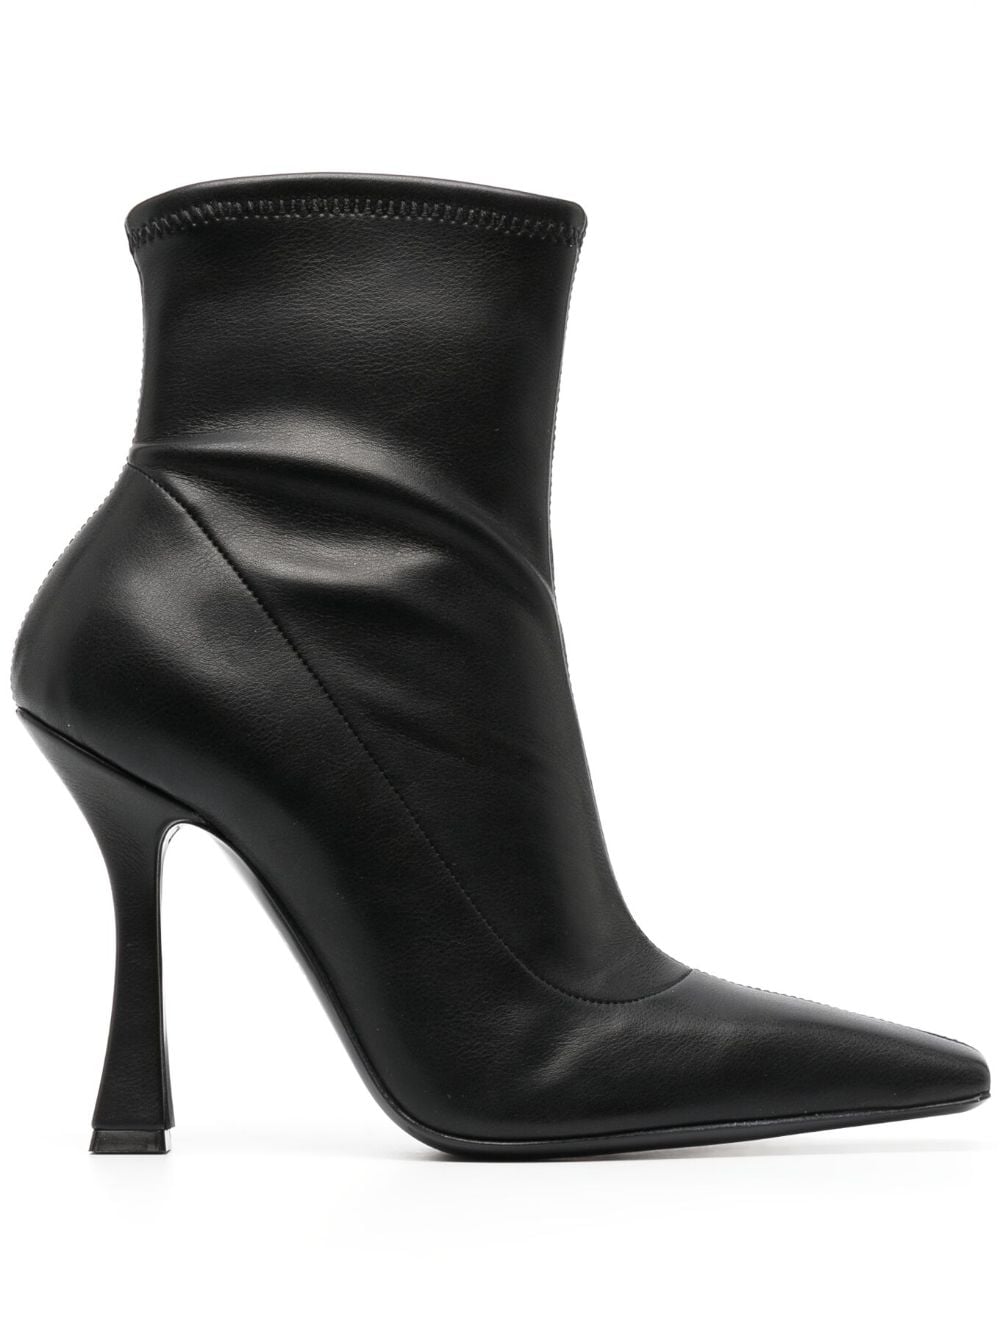 Image 1 of Casadei Geraldine 100mm leather boots